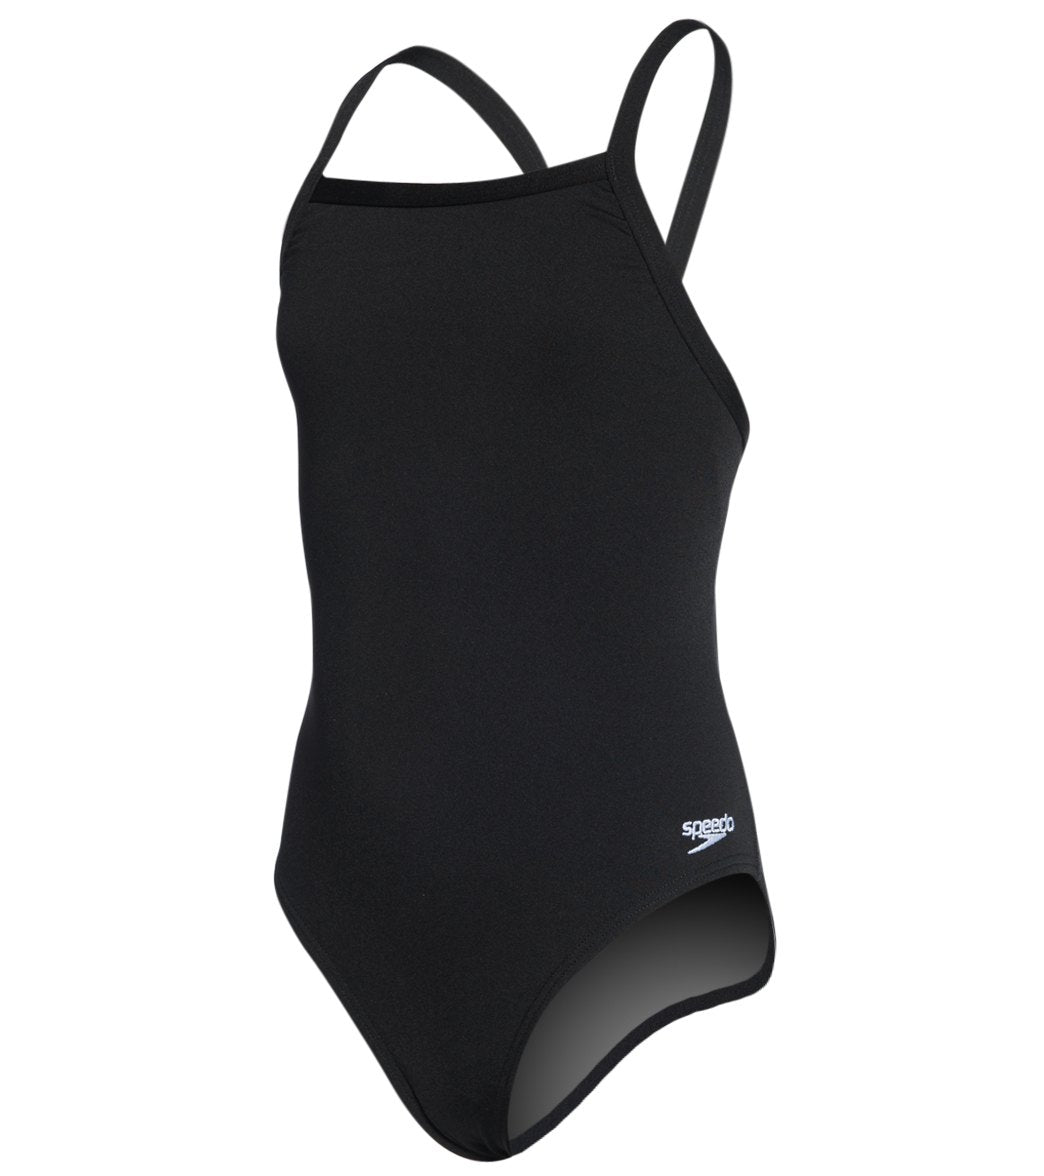 Speedo Girls Solid Endurance + Flyback Training One Piece Swimsuit at SwimOutlet